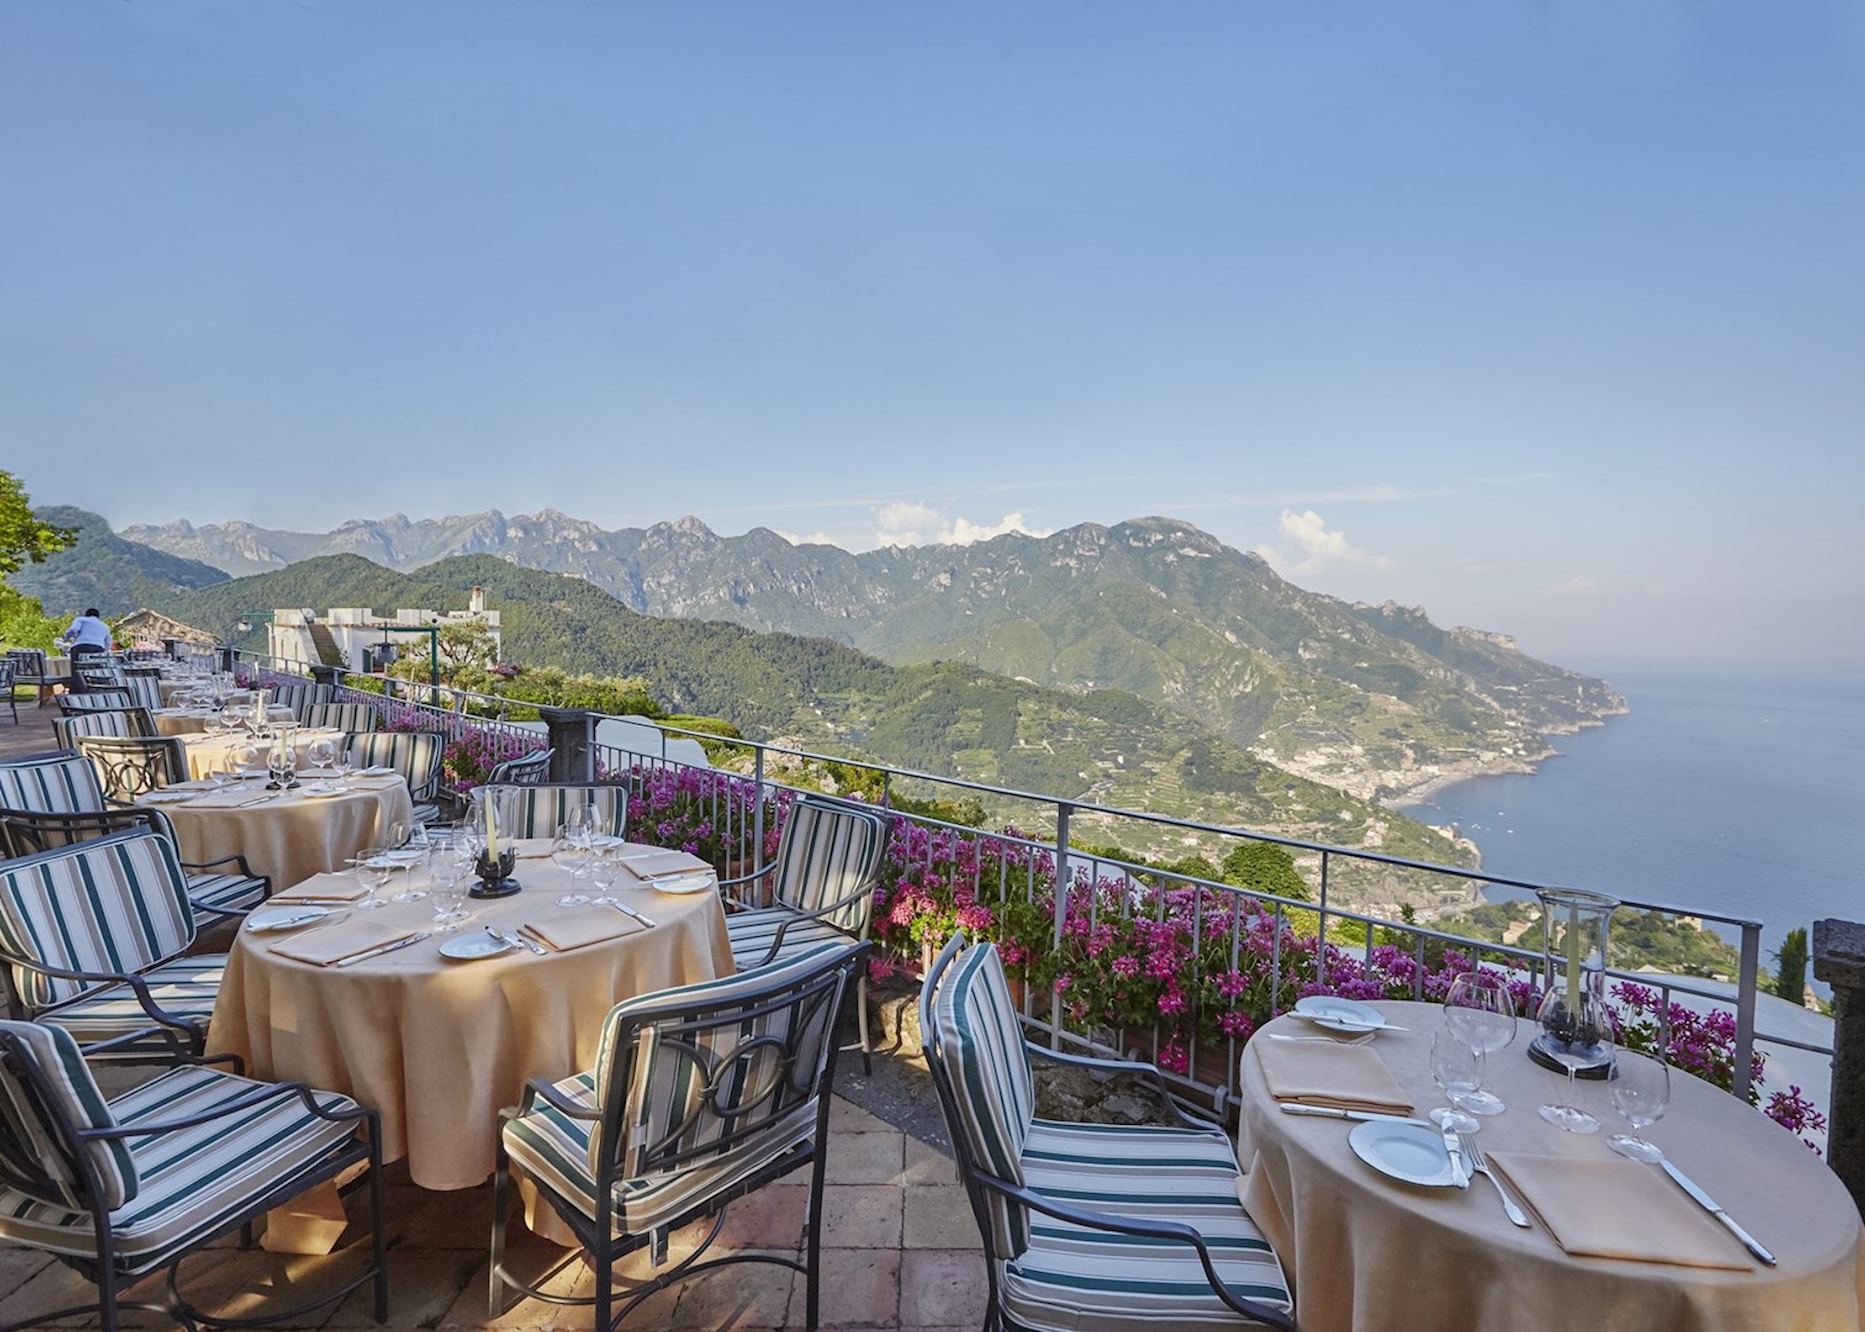 Belmond Hotel Caruso Review: What To REALLY Expect If You Stay